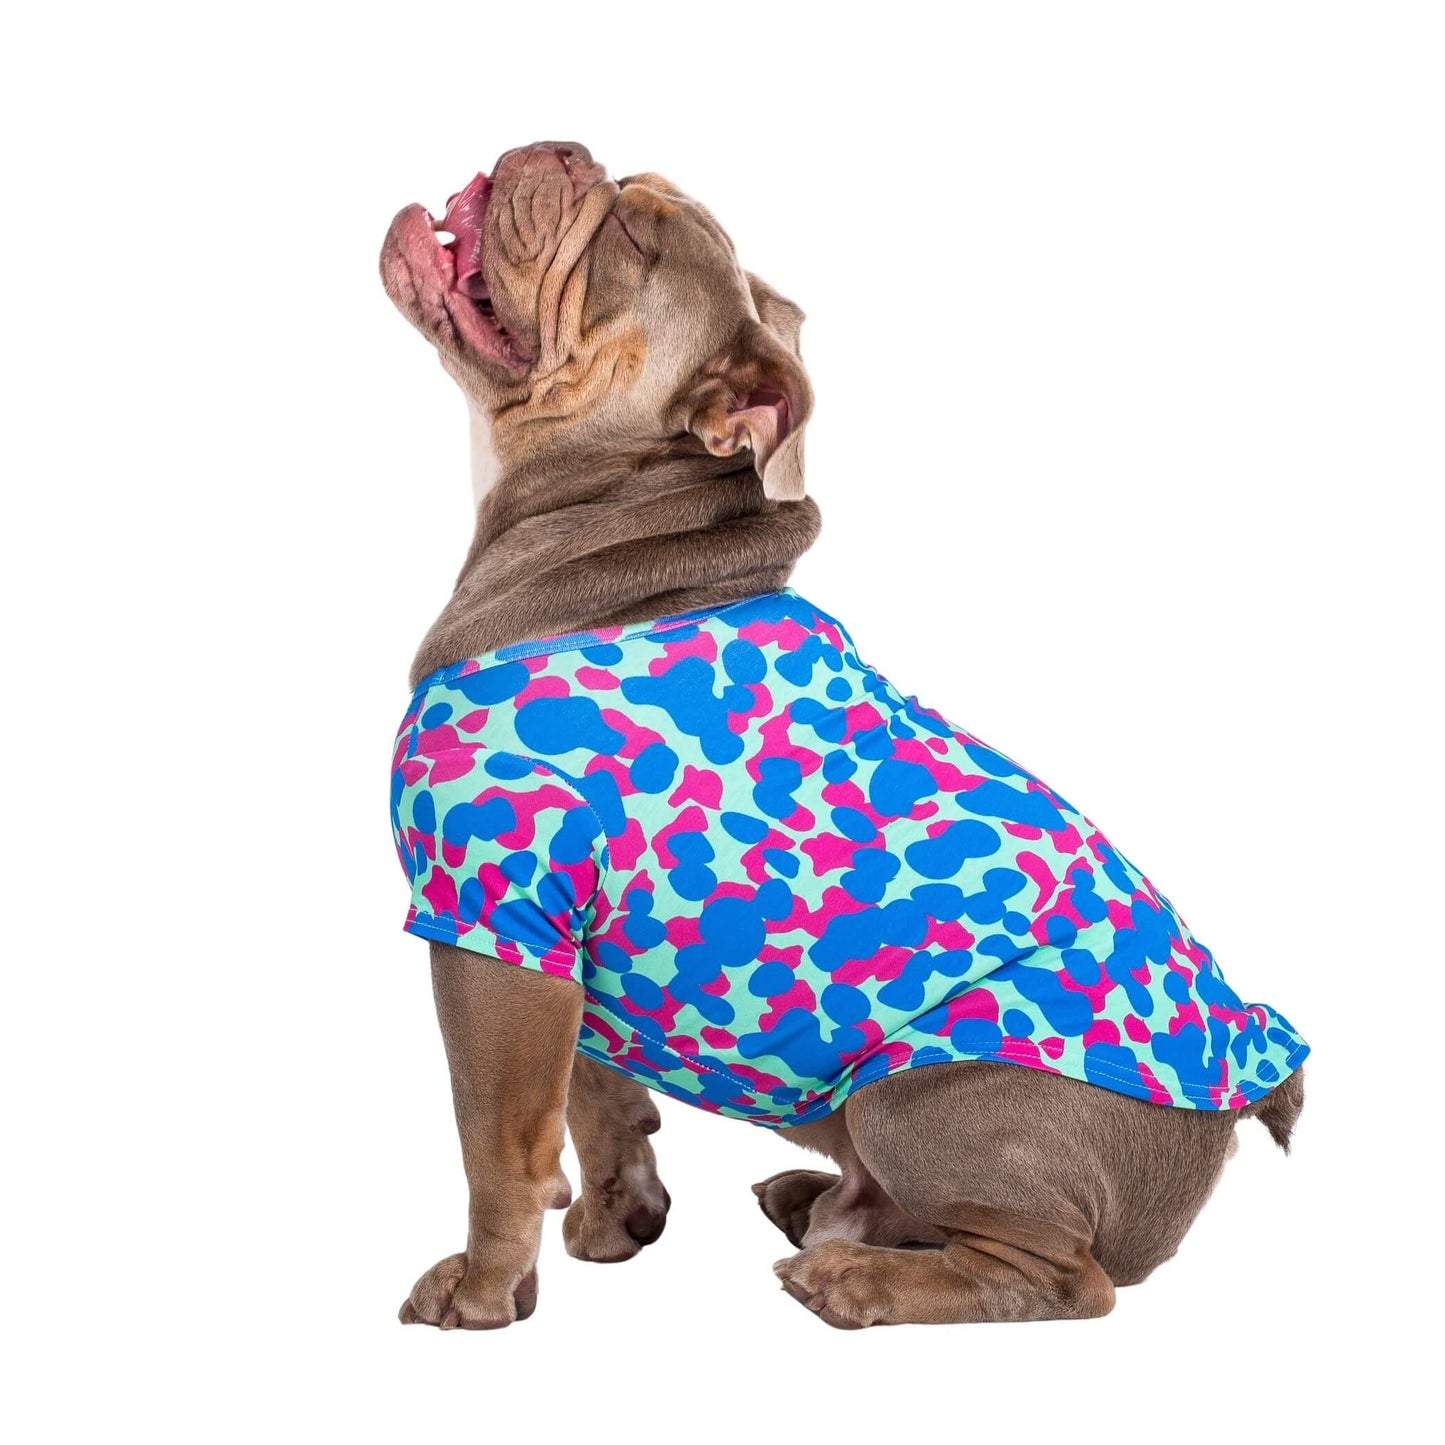 An English Bulldog standing side on to the camera. It is wearing a Painted on dog shirt made by Vibrant Hound. The print is pink and blue blobs.